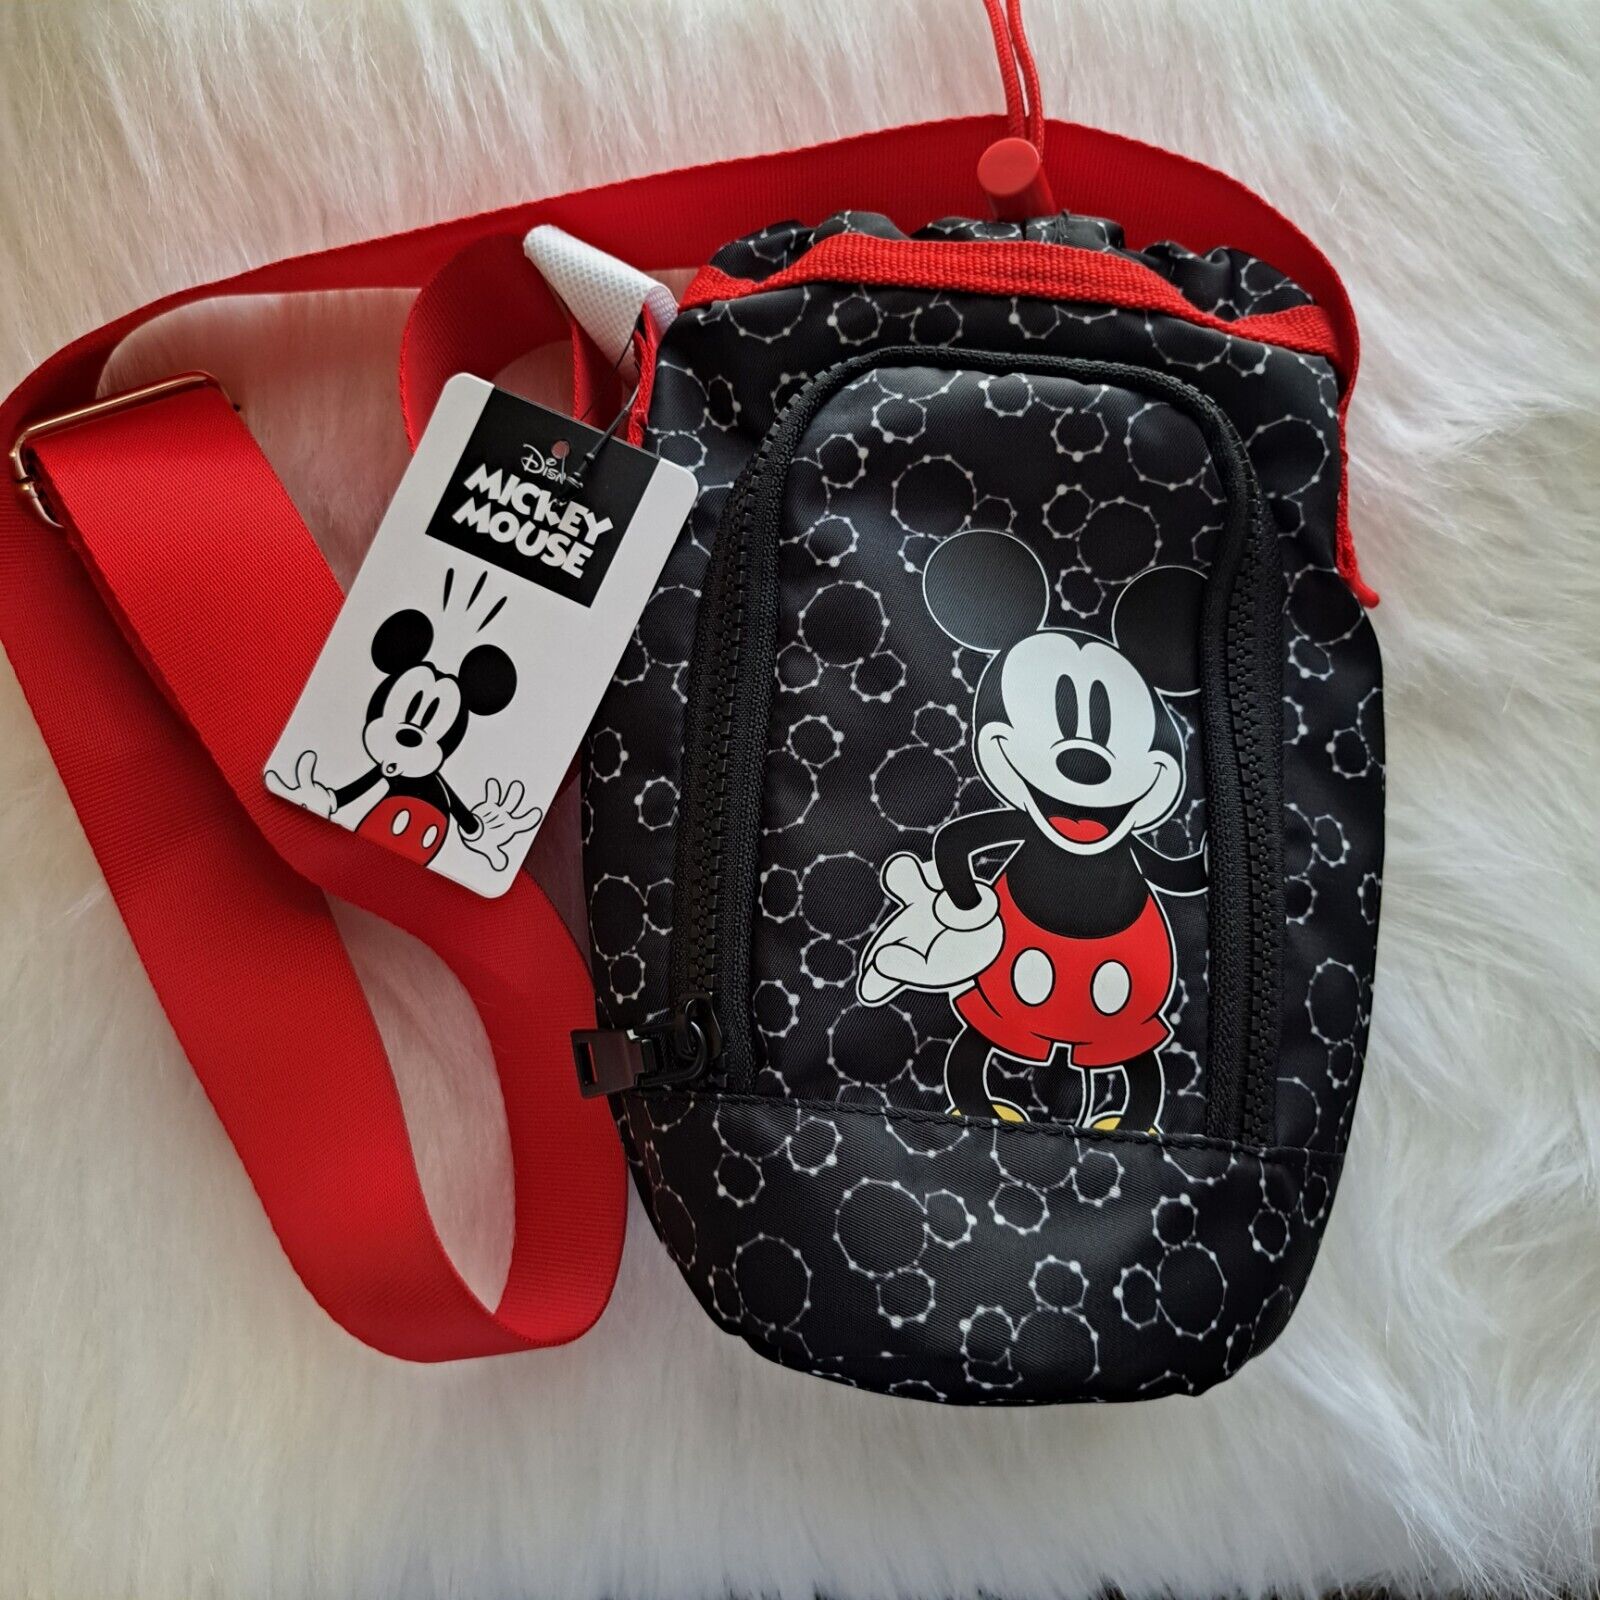 Disney Bioworld Mickey Mouse water bottle holder Black And Red With Adjust Strap